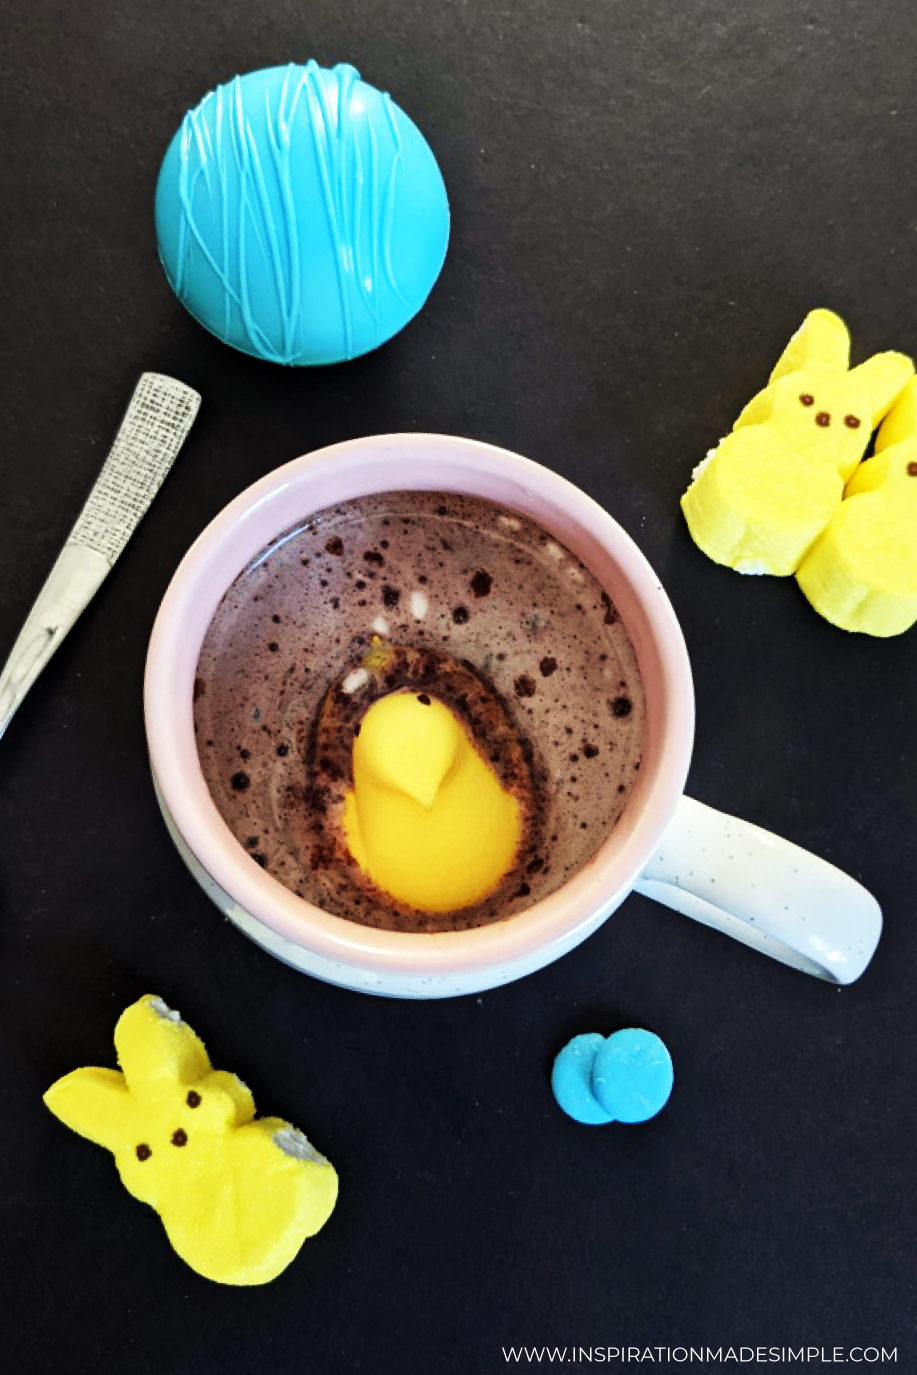 Melted Hot Chocolate Bomb with Peeps Chick inside